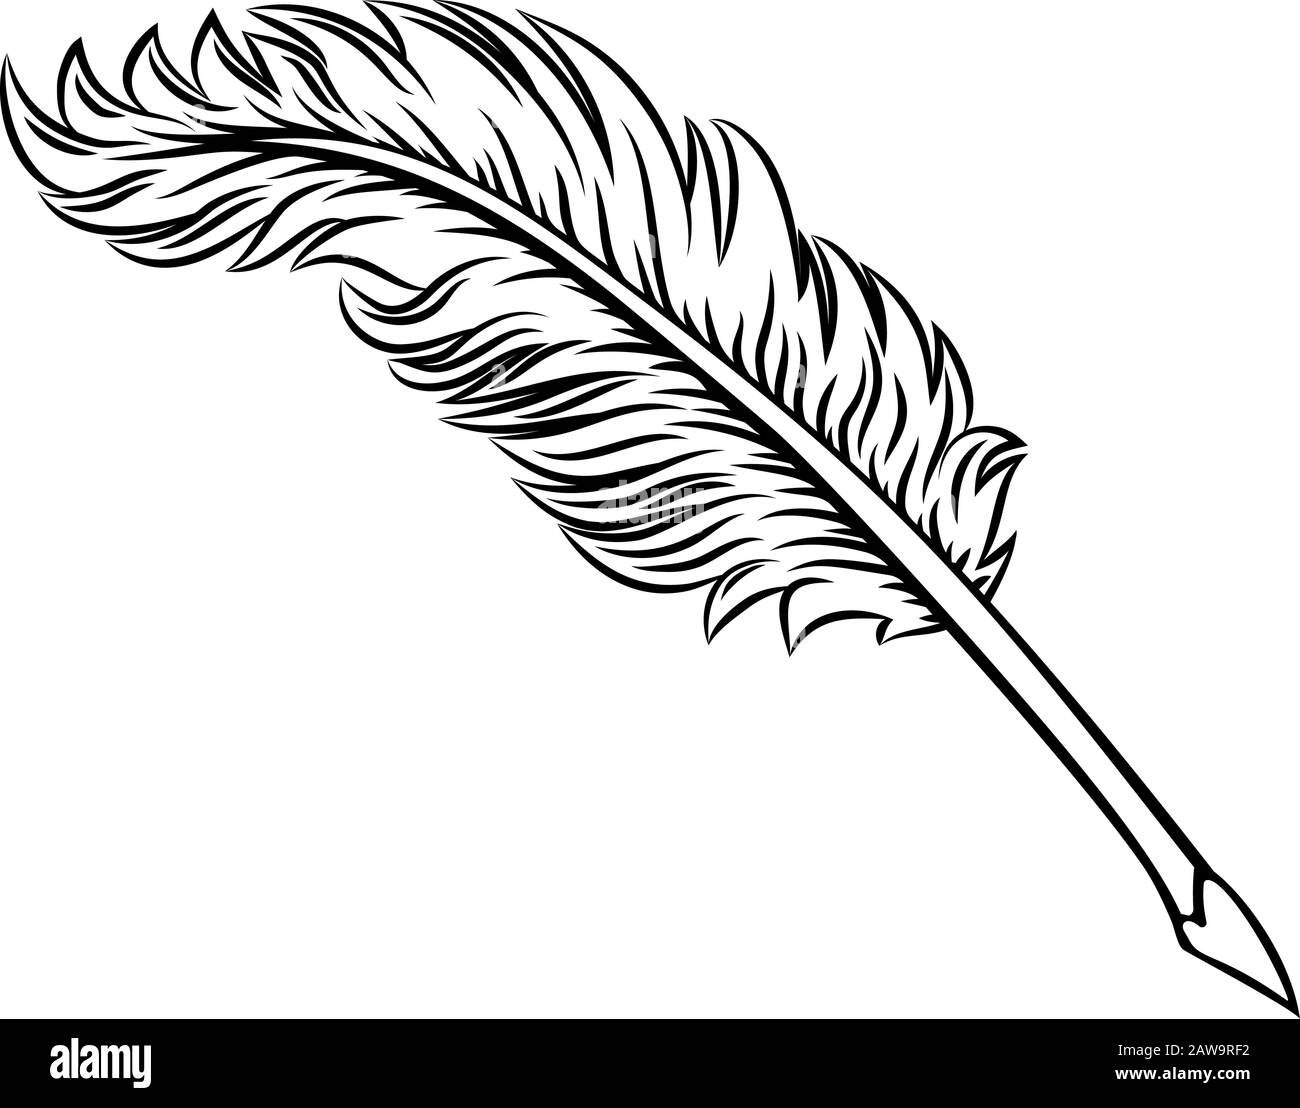 Quill Feather Ink Pen Icon Illustration Stock Vector